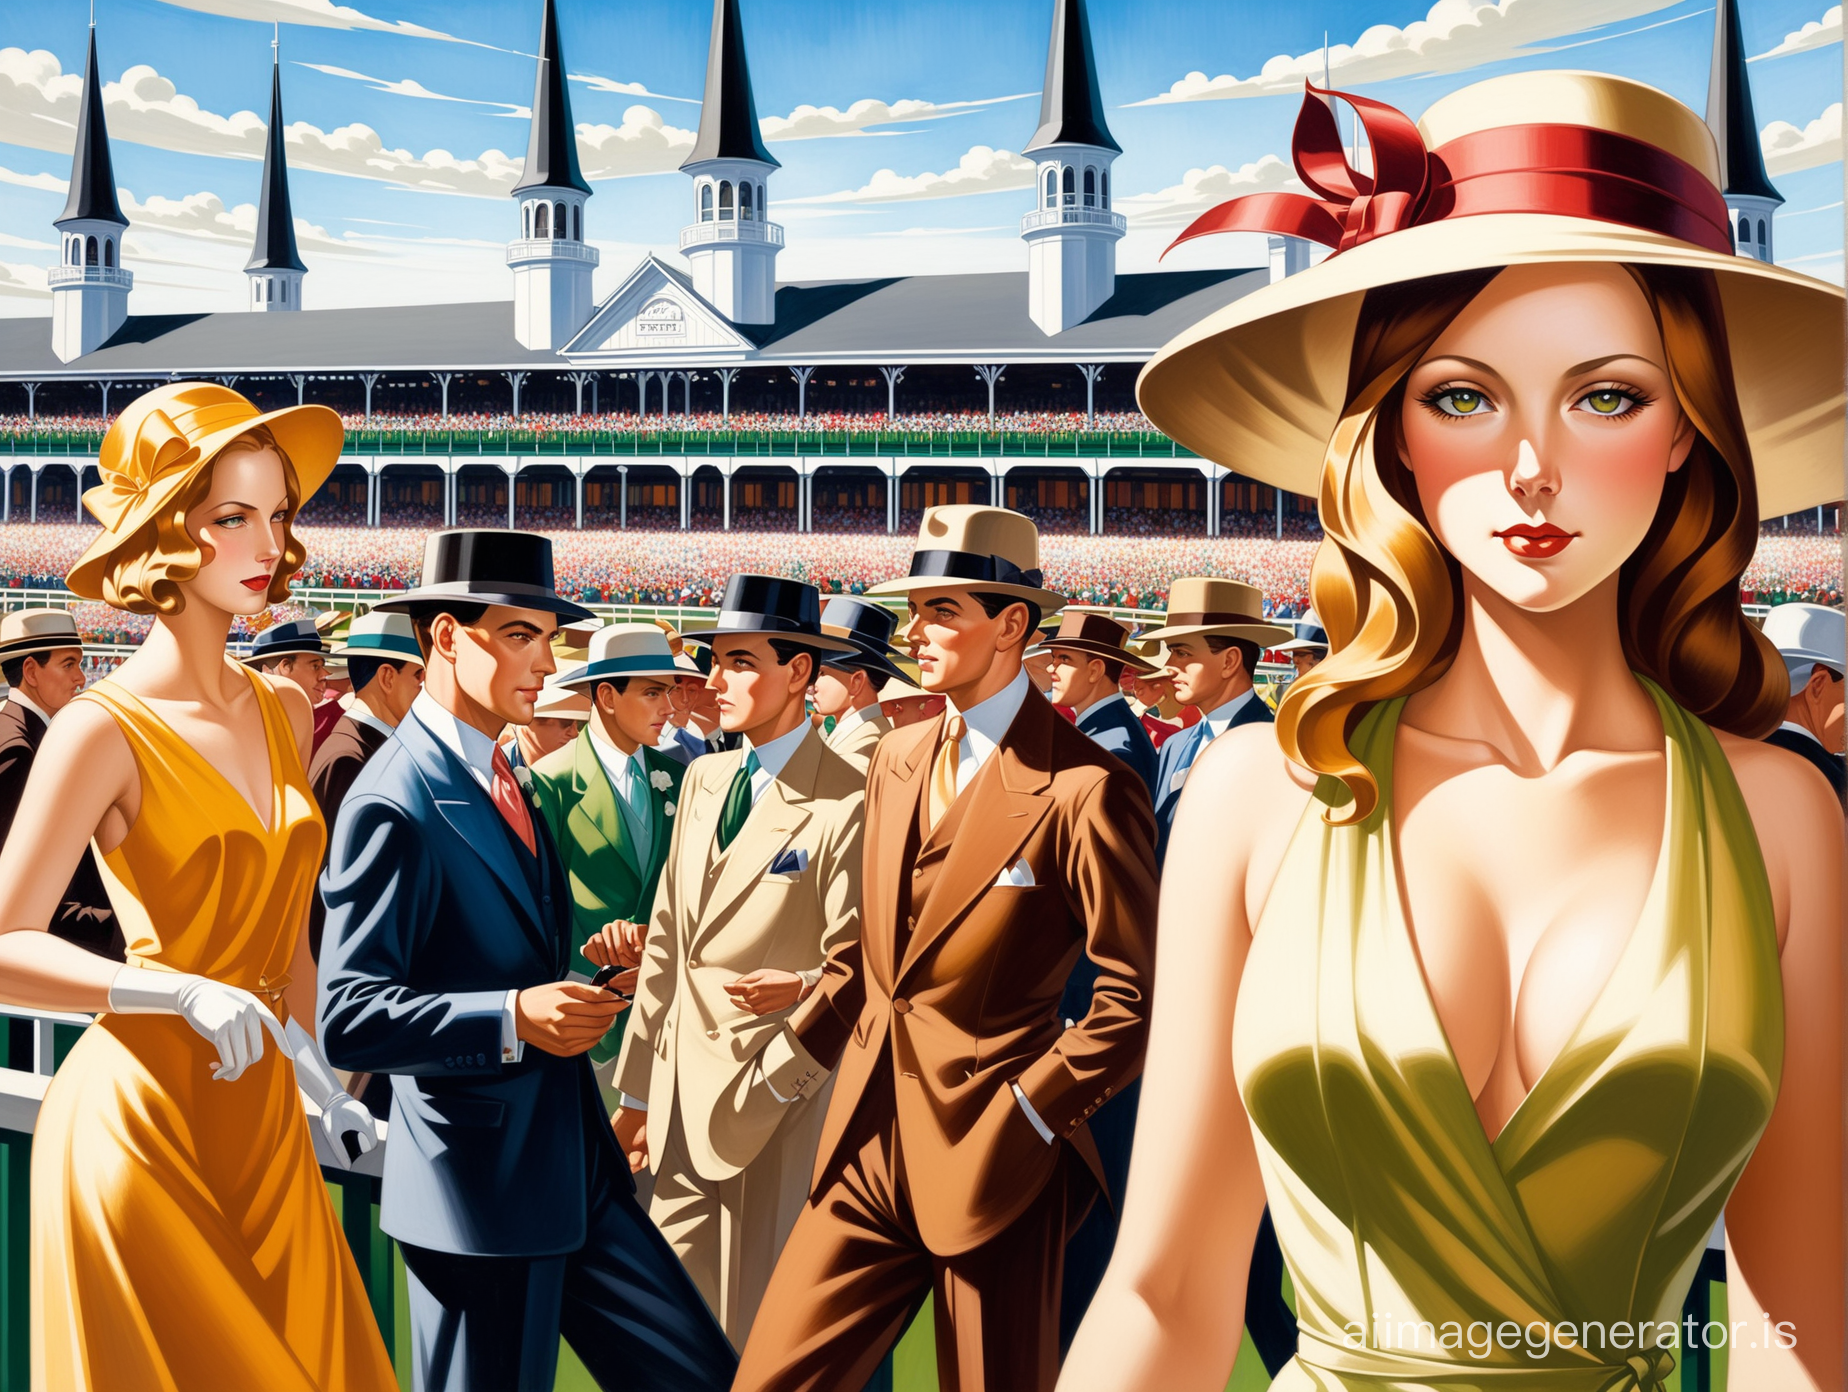 Create an image that captures the vibrant and bustling atmosphere of the Kentucky Derby in the unique Art Deco style of Tamara de Lempicka. Imagine a scene where sleek, stylized horses are racing fiercely towards the finish line, their muscular forms simplified into the smooth, flowing lines characteristic of Lempicka's work. The jockeys are poised and elegant, their bodies merging seamlessly with their mounts, depicted in a palette of bold, saturated colors. The background should feature the iconic twin spires of Churchill Downs, simplified into geometric shapes, under a bright, clear sky. Add a touch of glamour by including a crowd of fashionable spectators in the stands, their outfits and hats a nod to the 1920s elegance, rendered in Lempicka's signature polished and shiny style. The whole composition should exude the excitement and dynamism of the Kentucky Derby, encapsulated in Lempicka's modernist approach.
